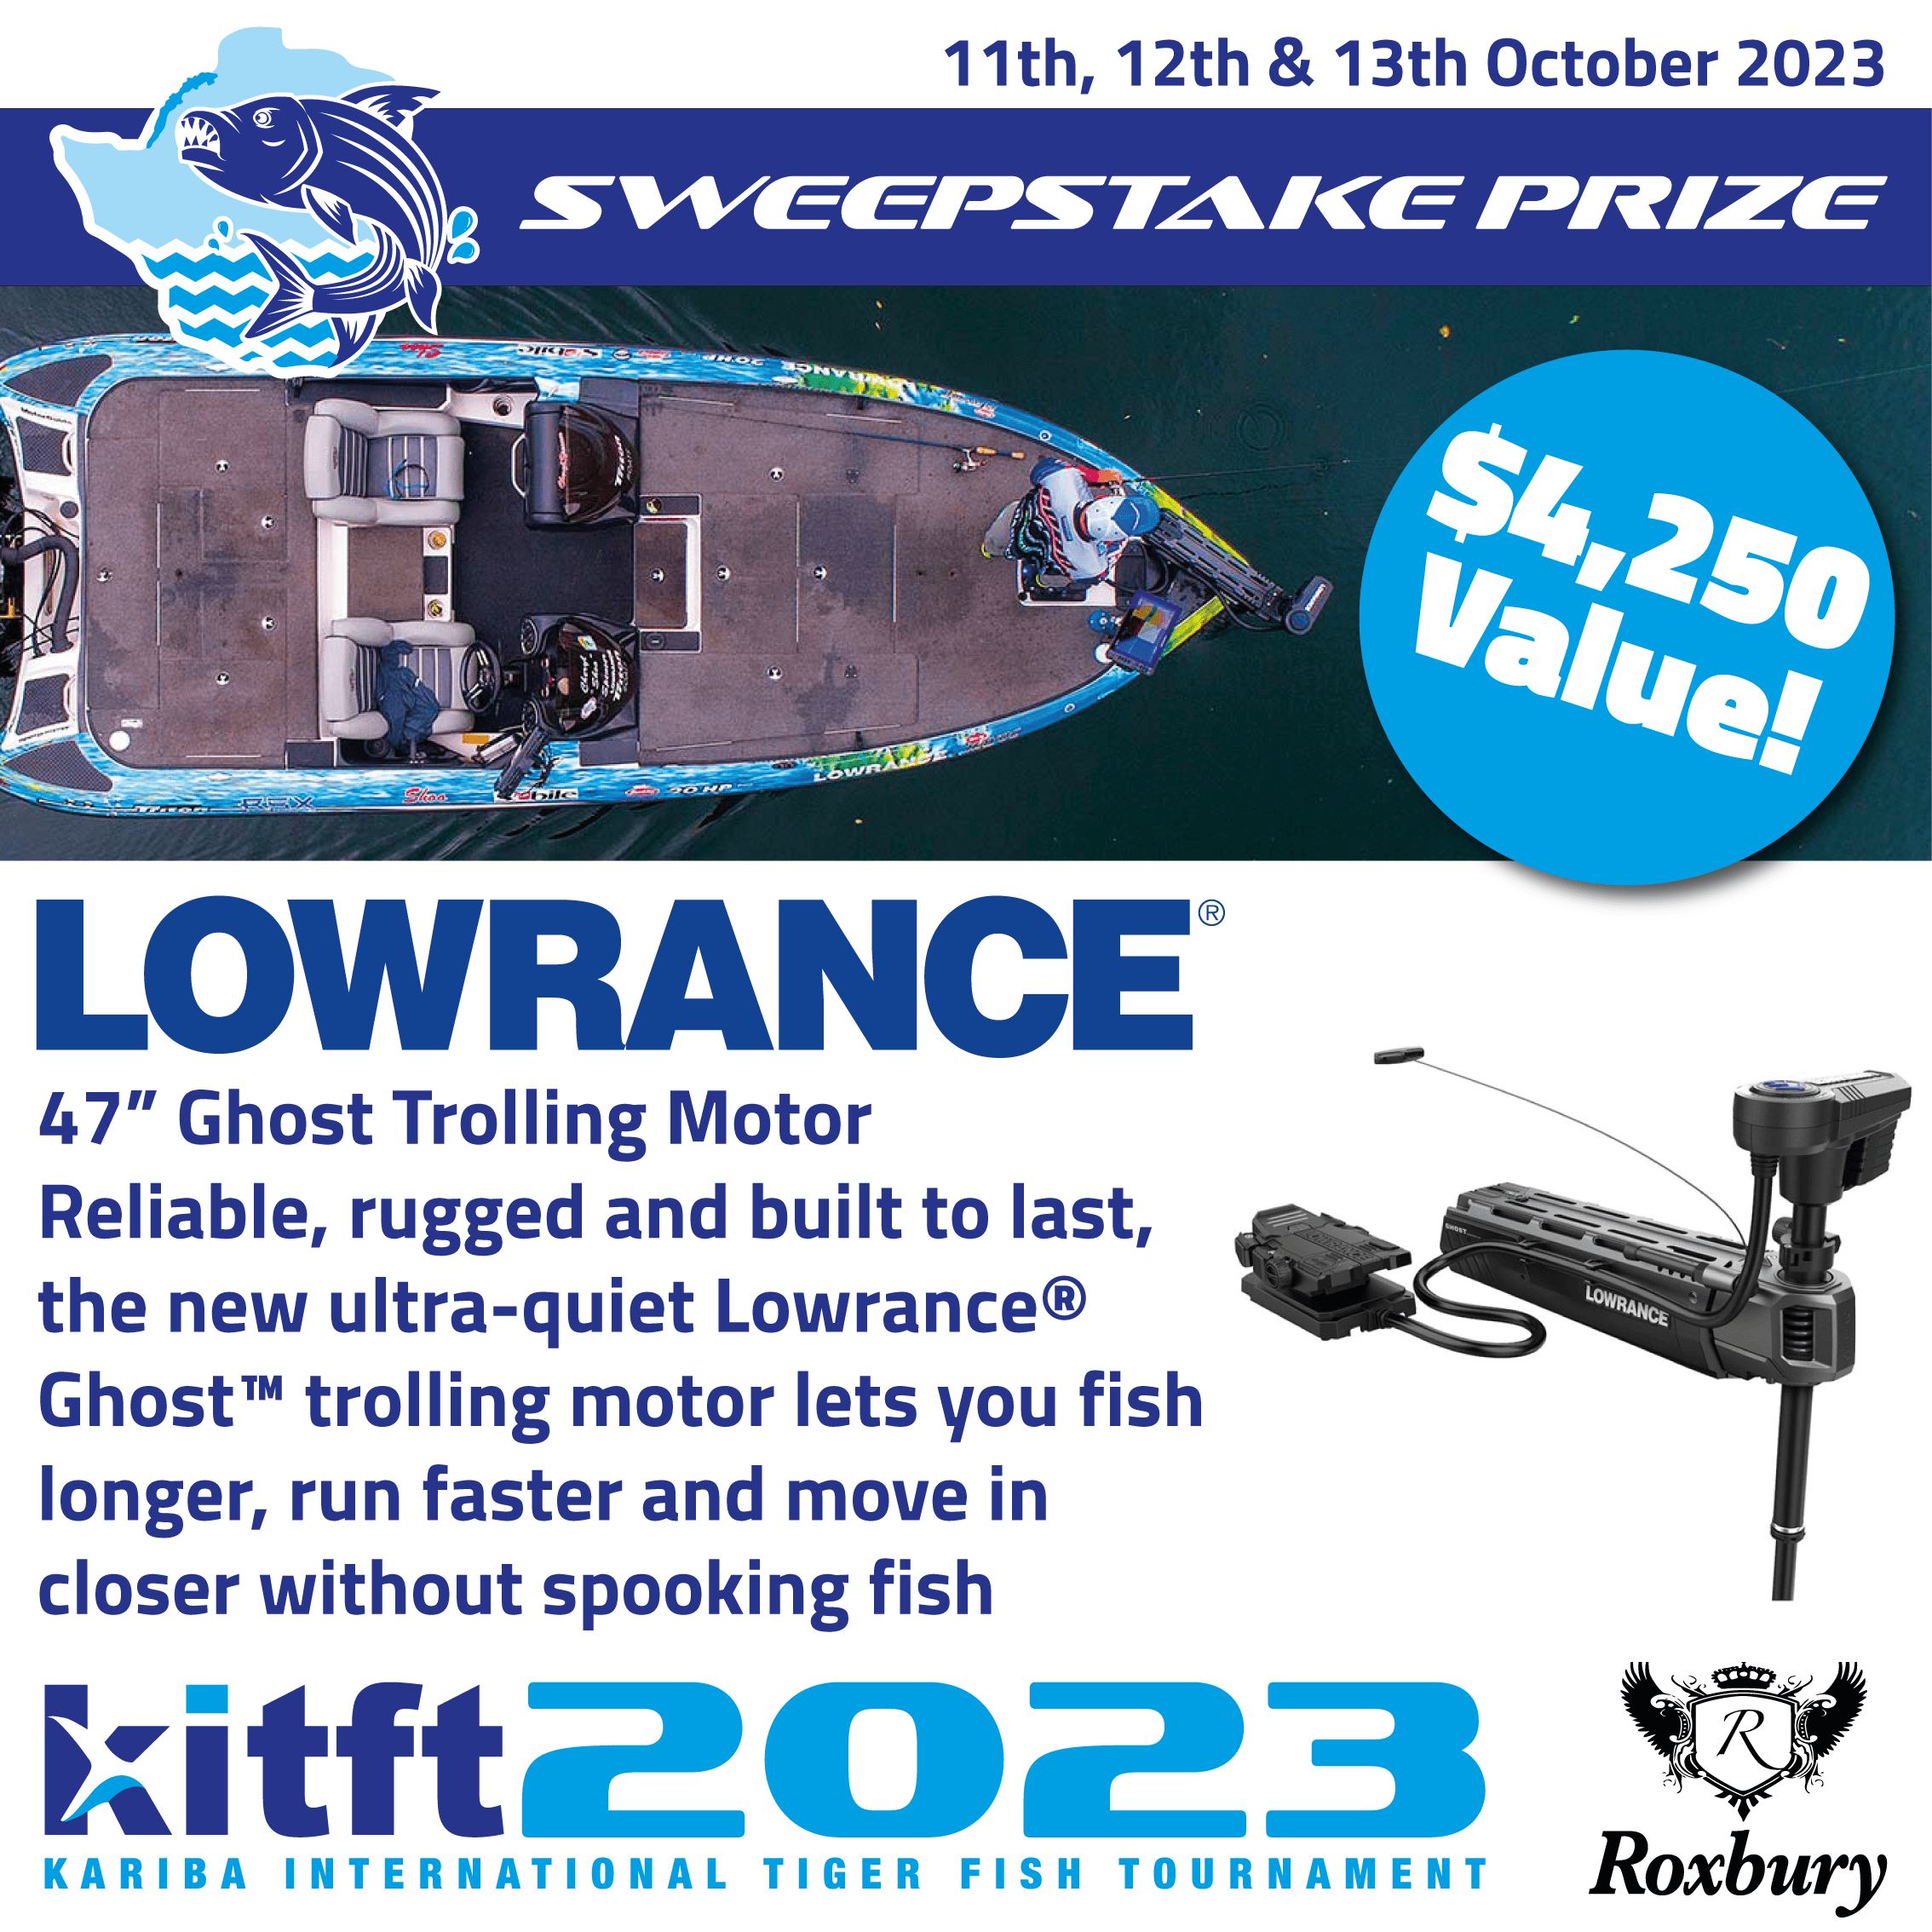 20230704-Sweepstakes-Prize-Lowrance